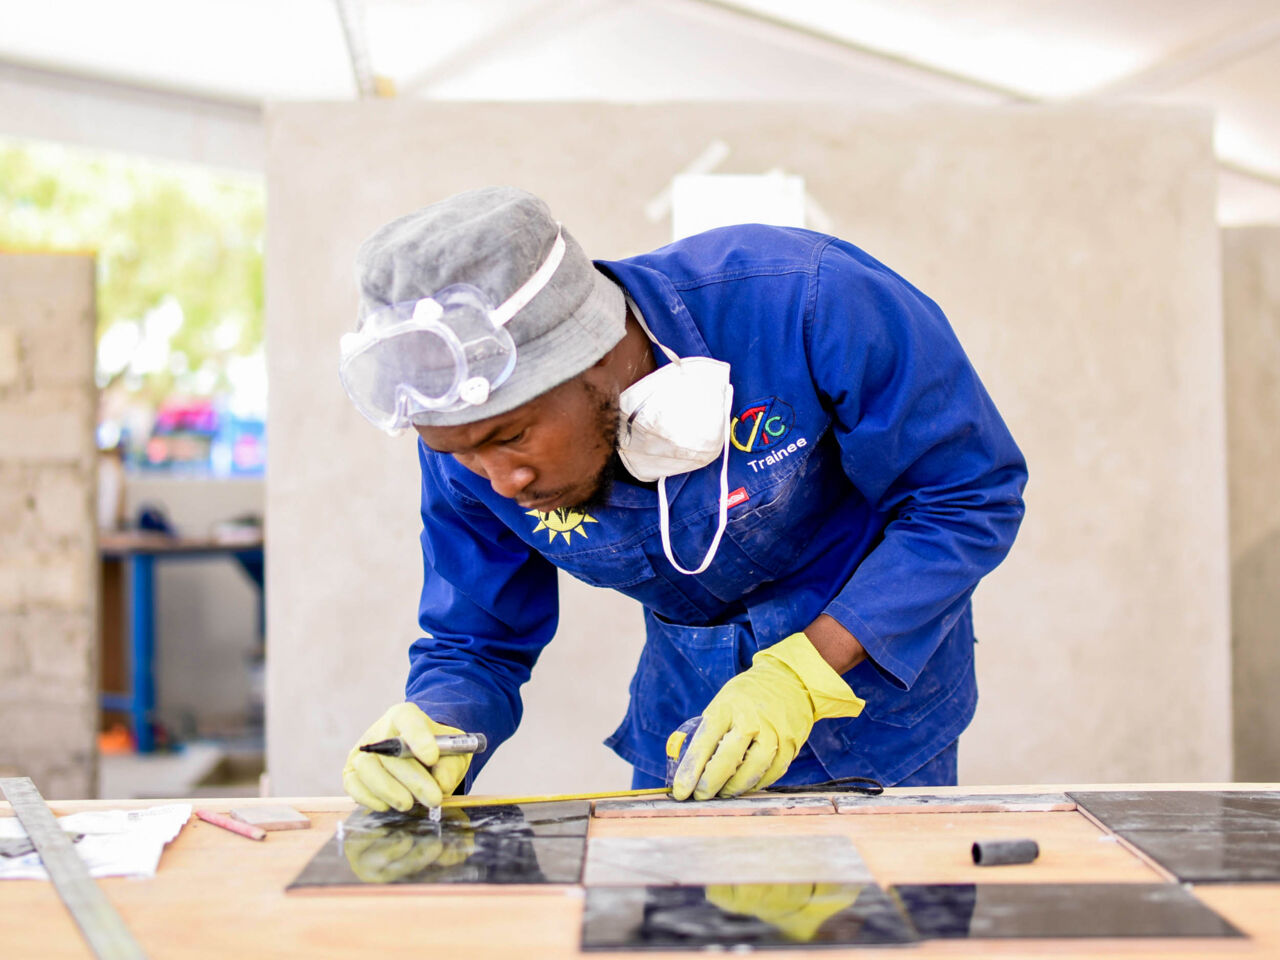 A competitor leaning over a workbench doing close work on tiles during Ongwediva 2023 (NSCO2023), Namibia’s third National Skills Competition taking place from 25 to 30 September 2023.